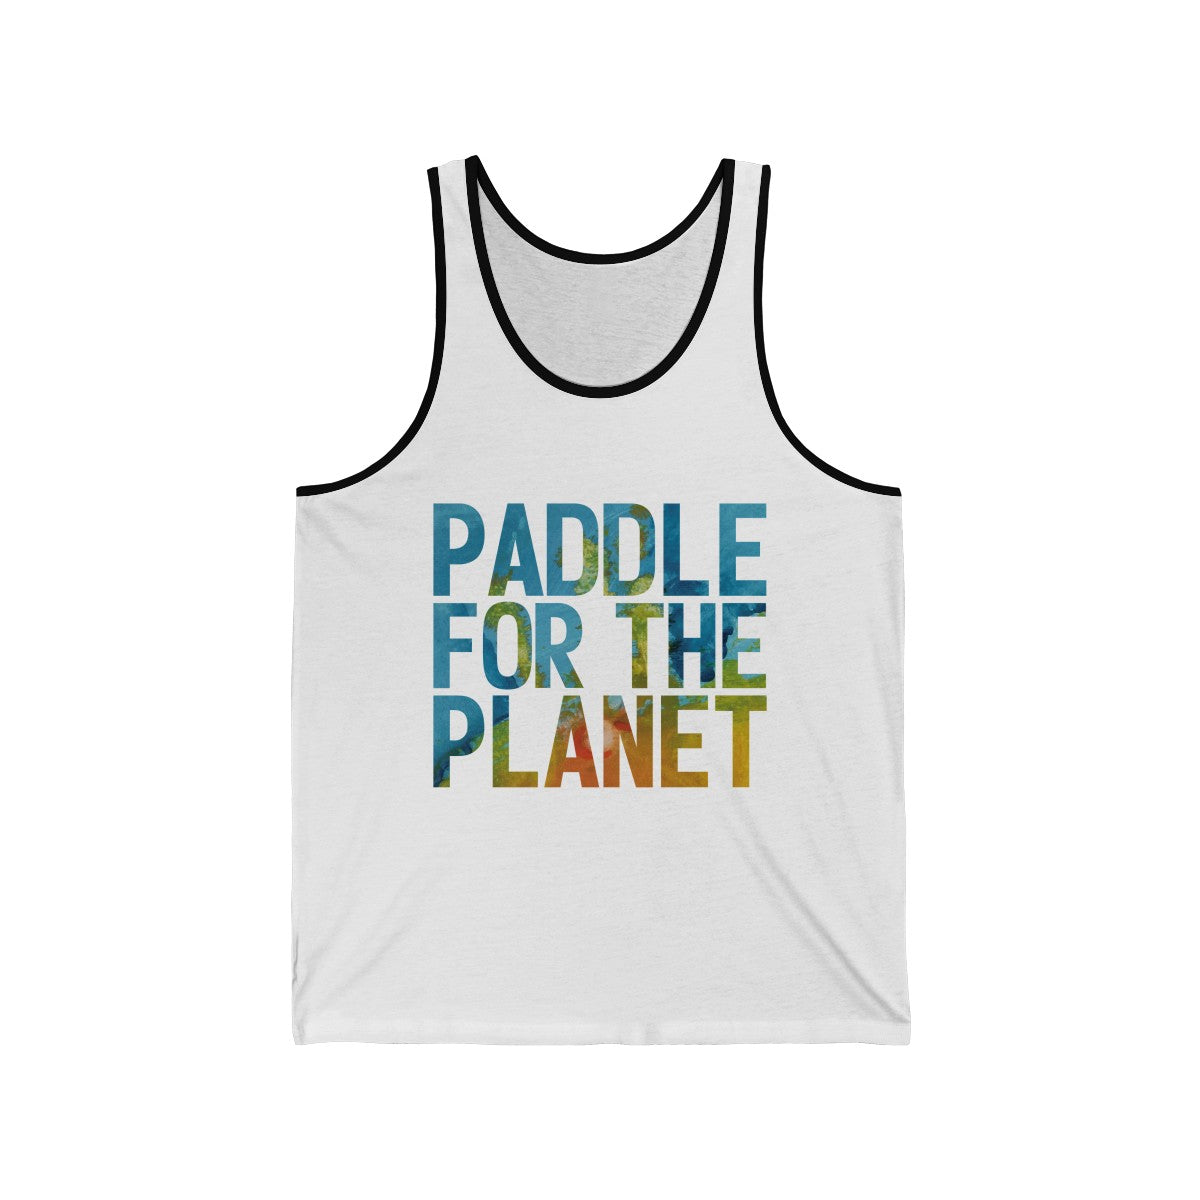 Paddle For The Planet Unisex Jersey Tank